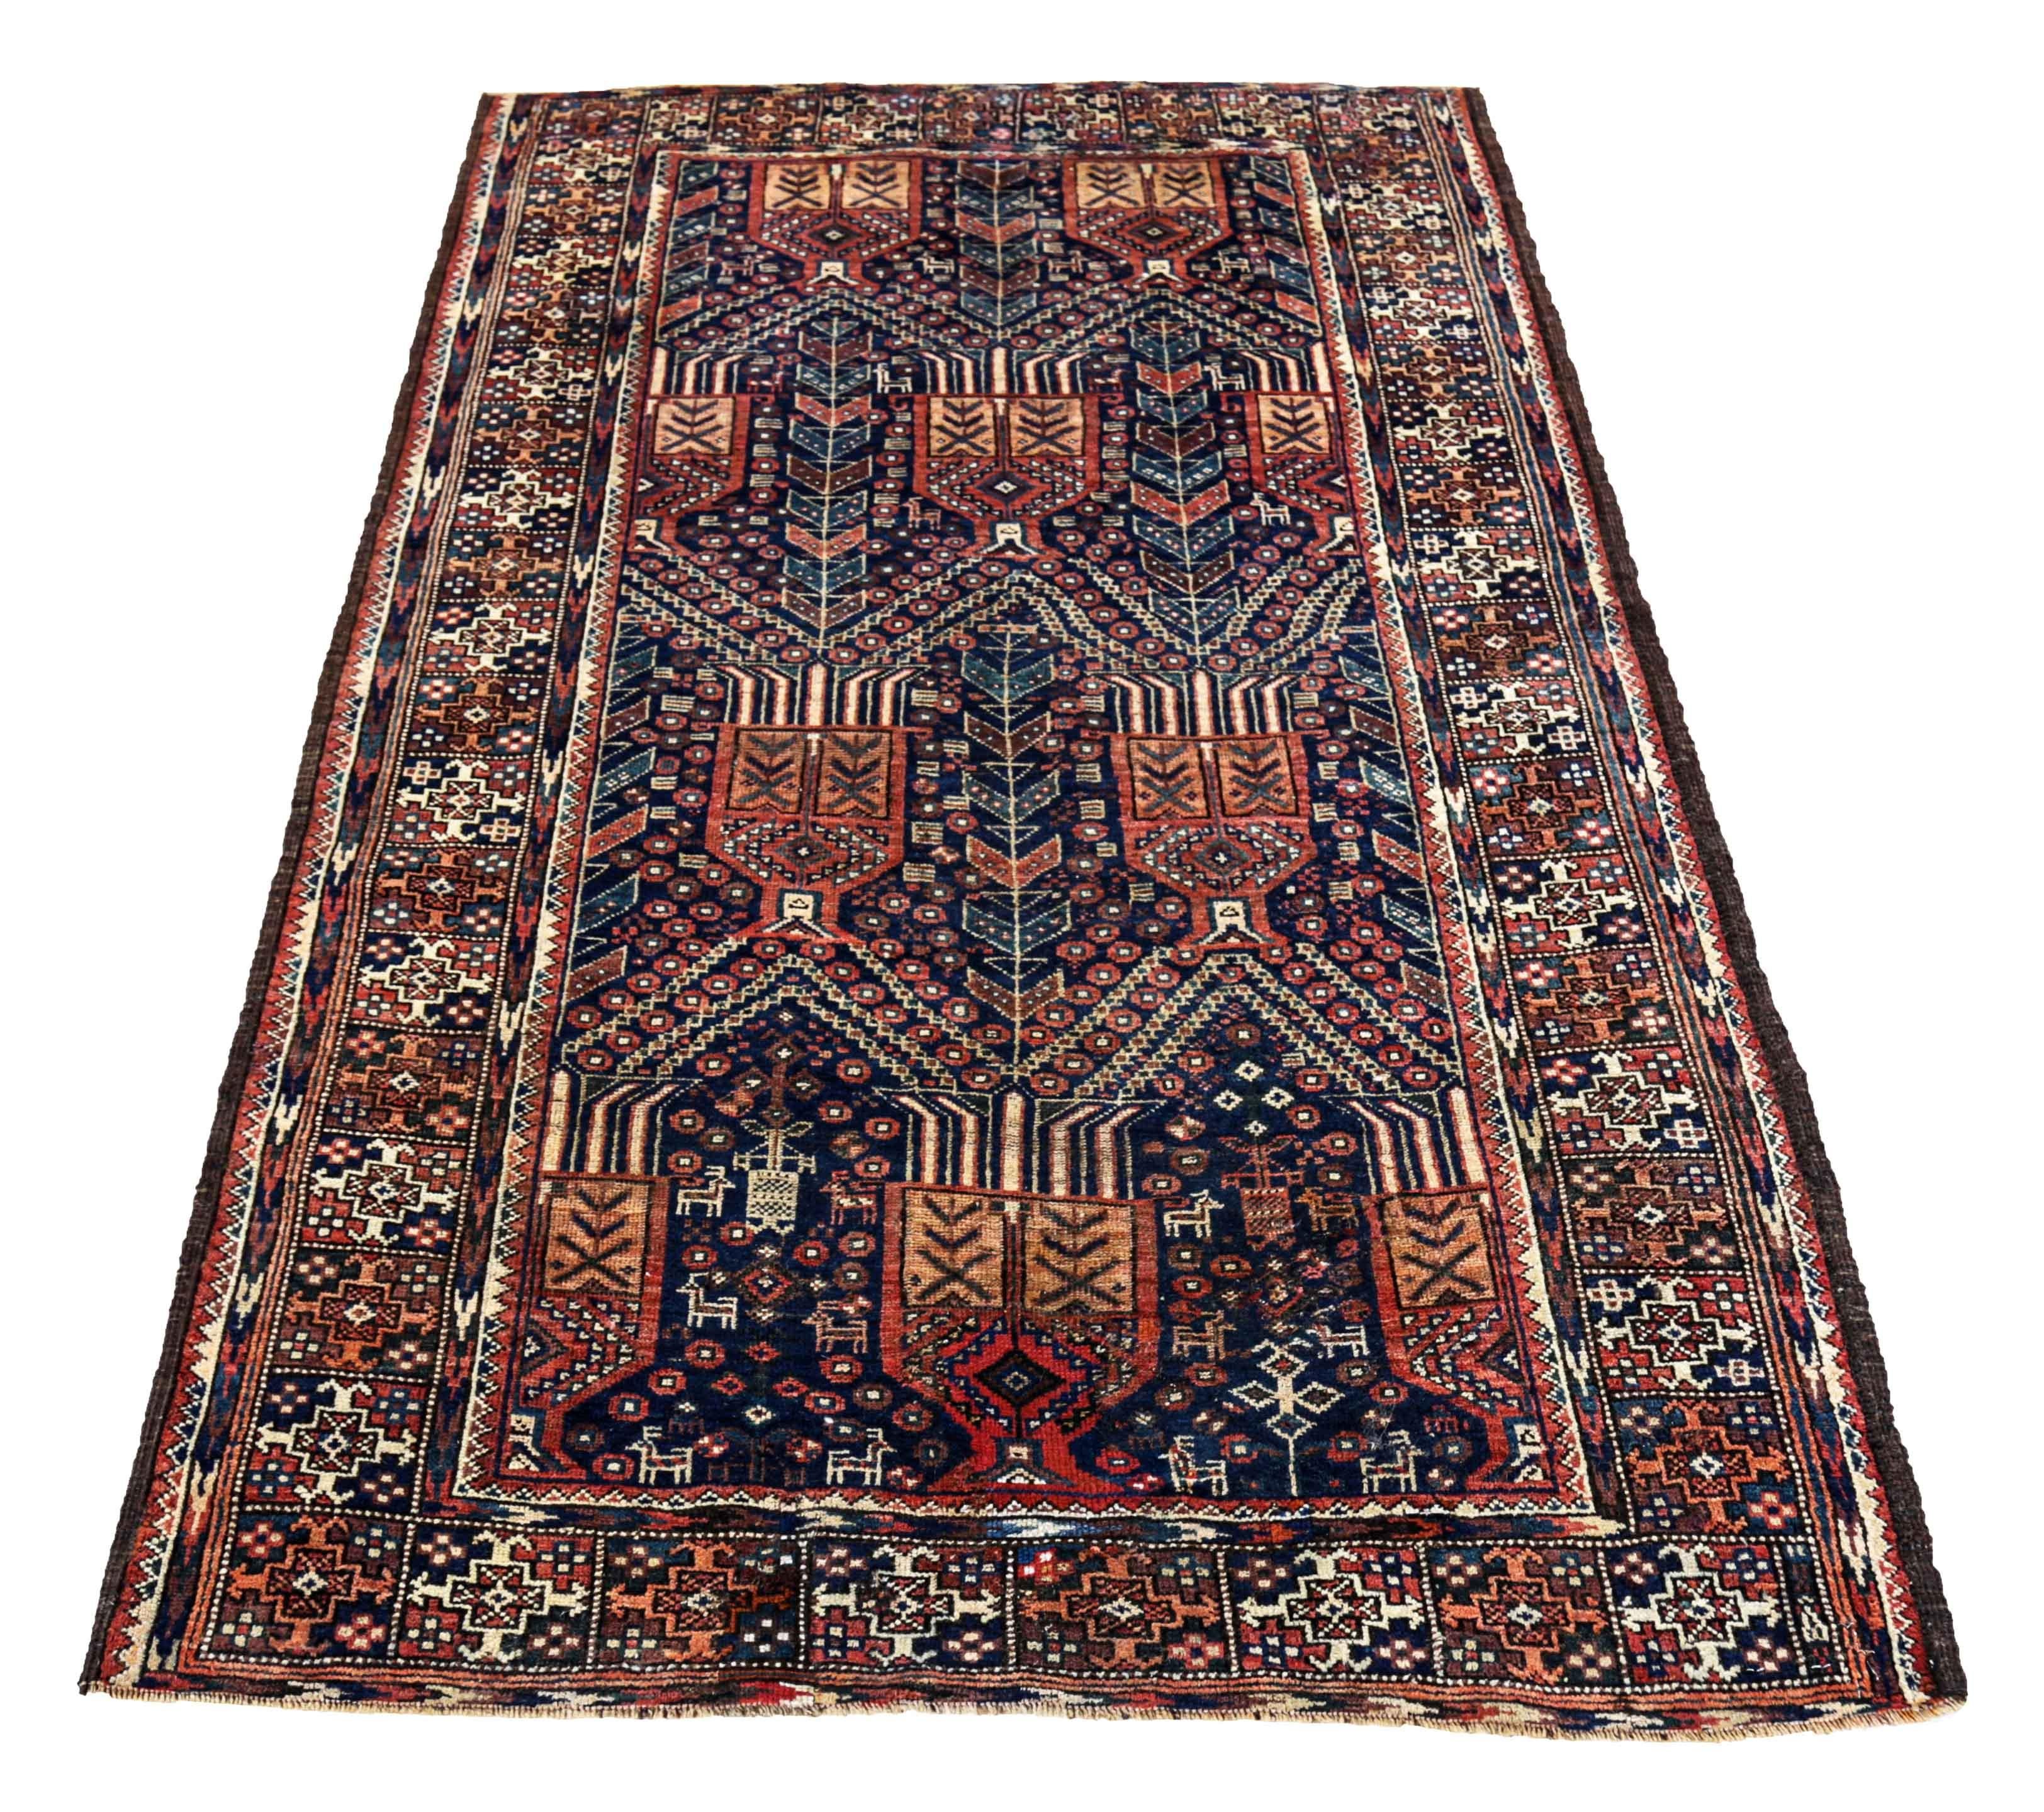 Antique Persian area rug handwoven from the finest sheep’s wool. It’s colored with all-natural vegetable dyes that are safe for humans and pets. It’s a traditional Balouch design handwoven by expert artisans. It’s a lovely area rug that can be